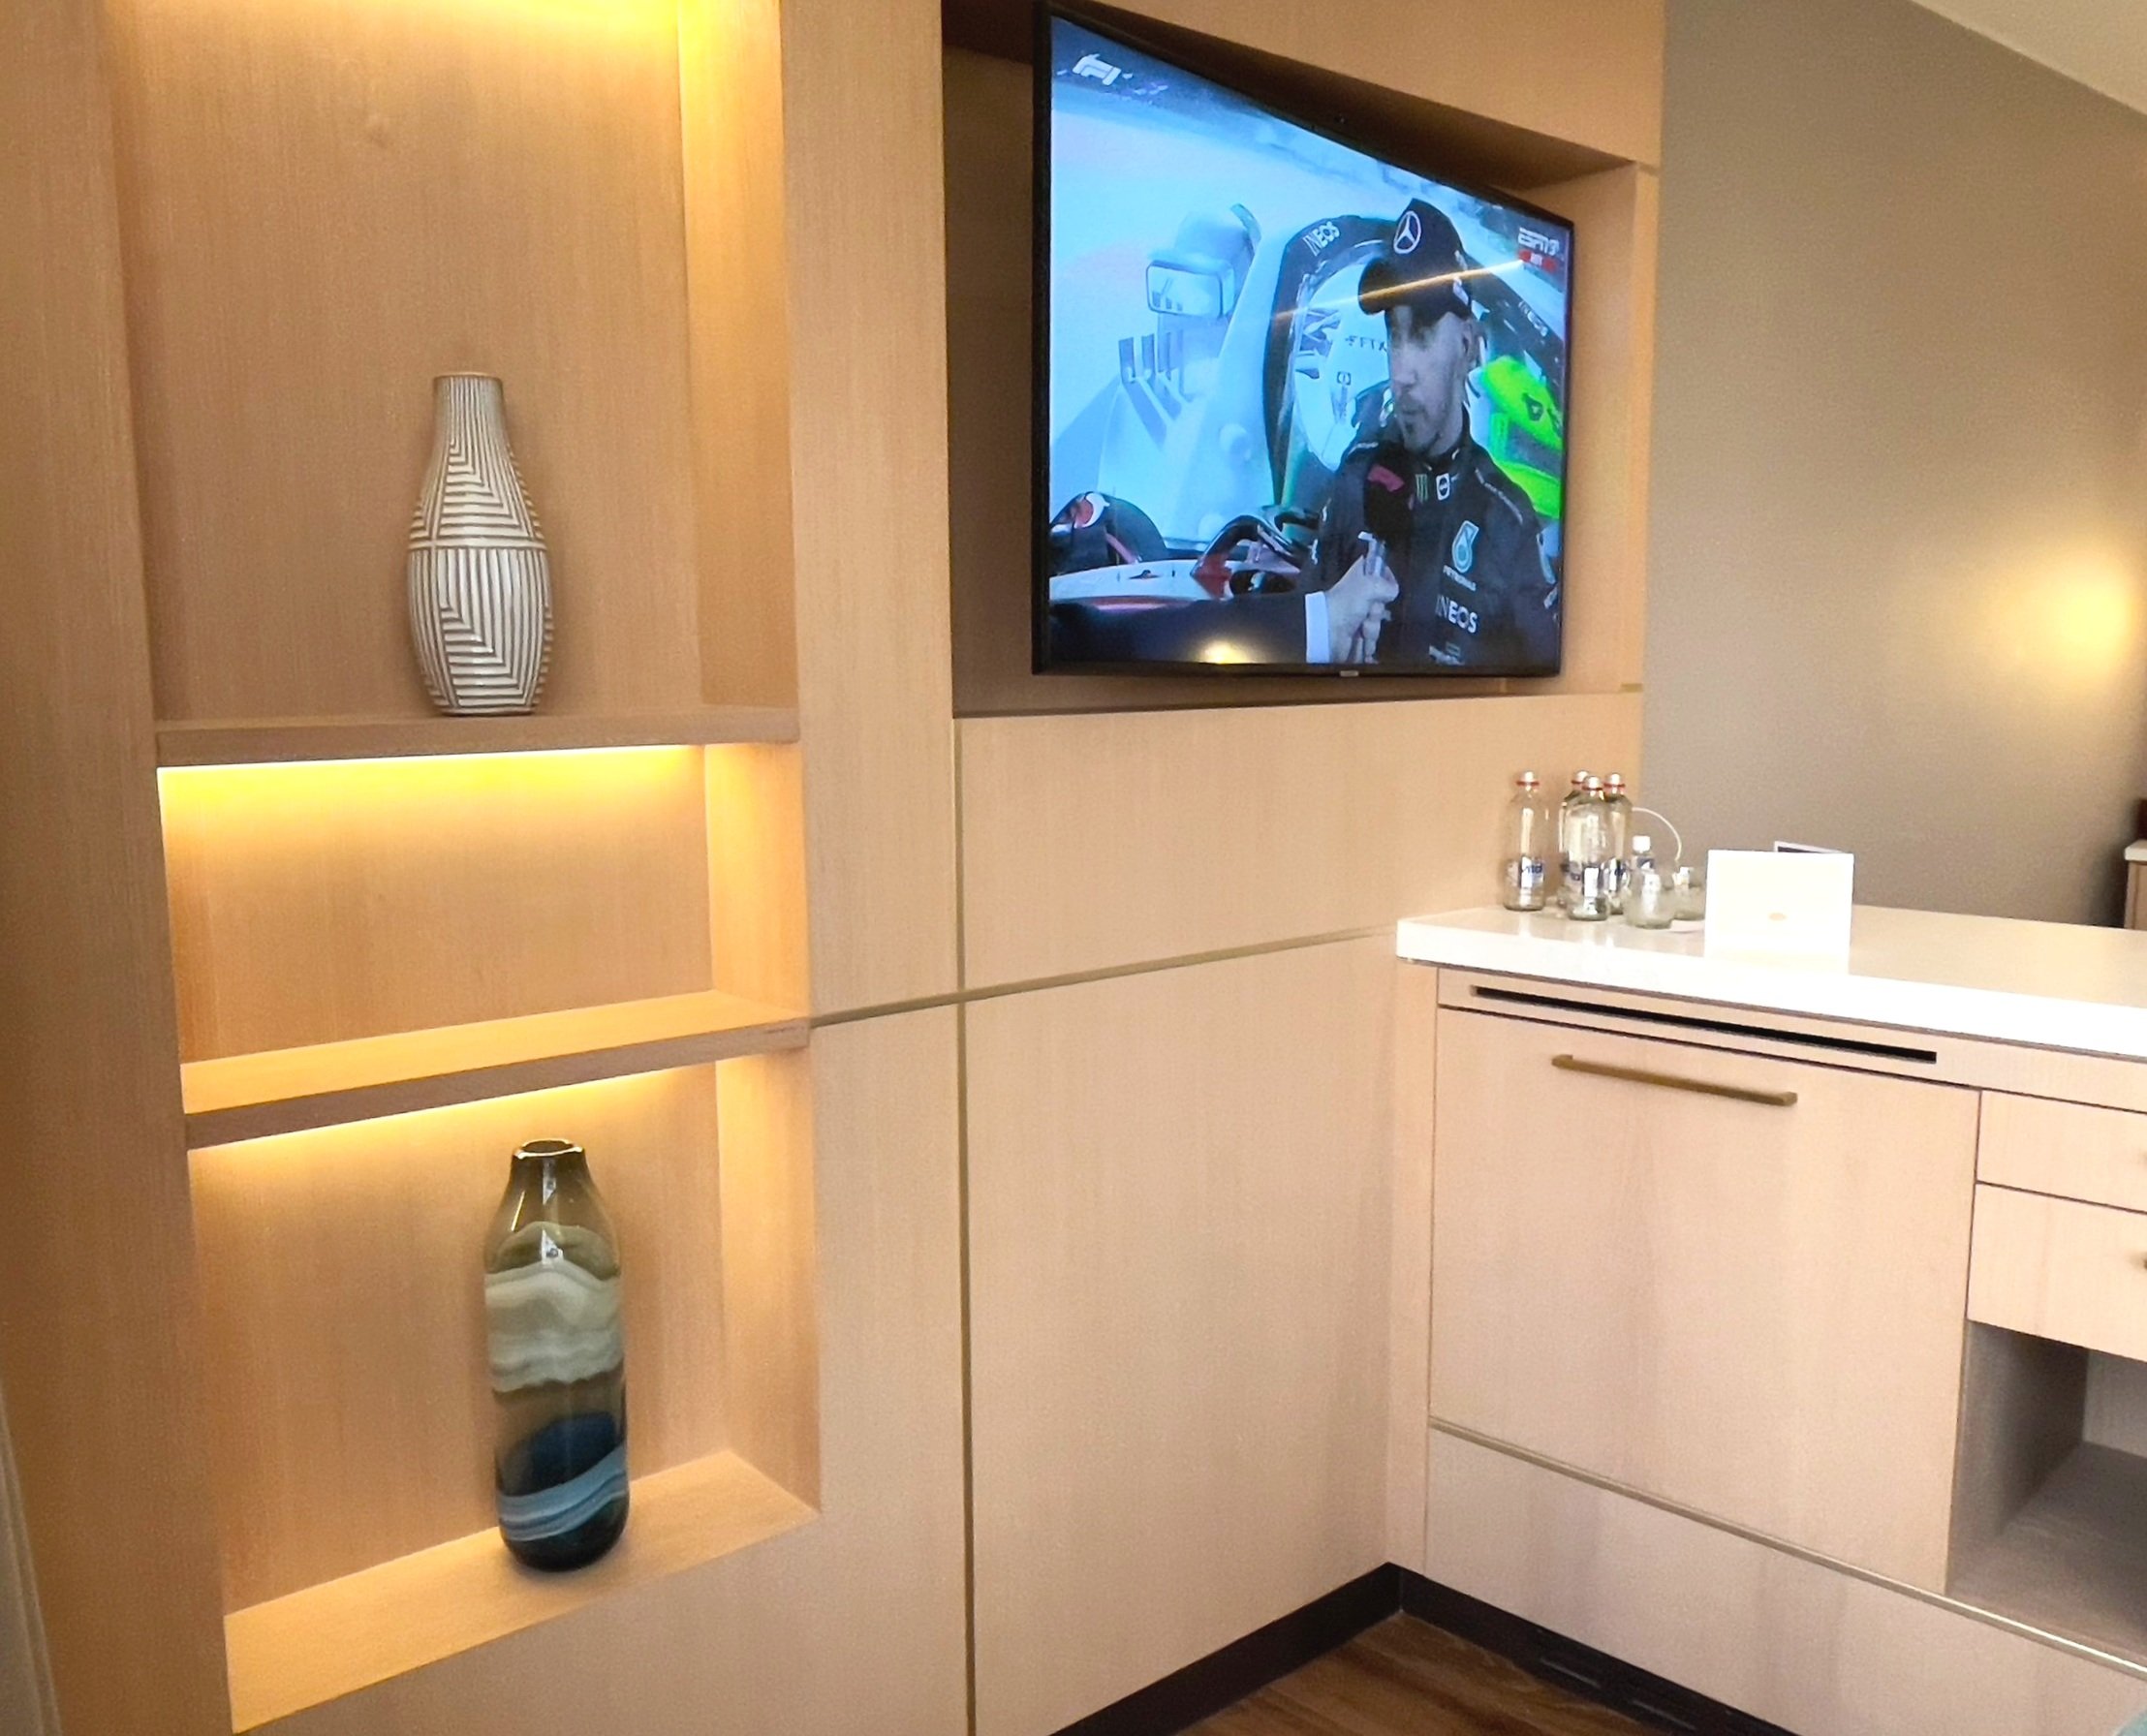 The TV in the wall unit and the minibar cupboard